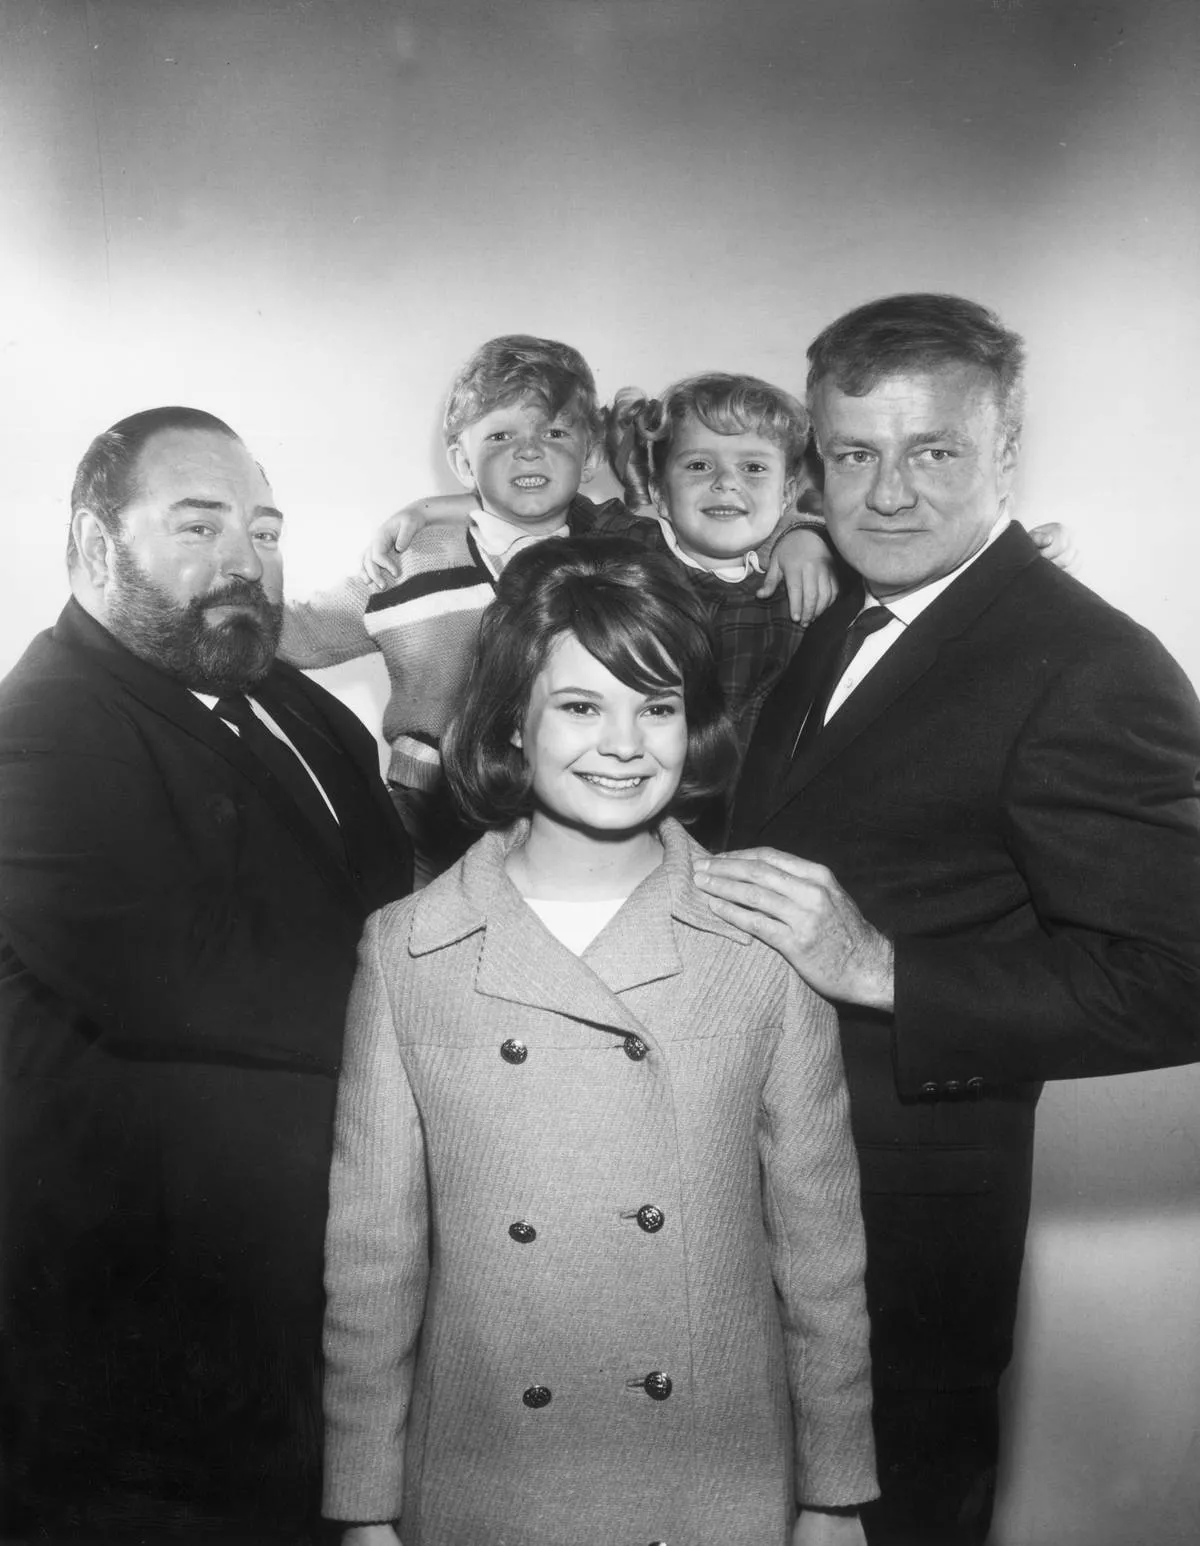 A promotional photo shows the cast of Family Affair.